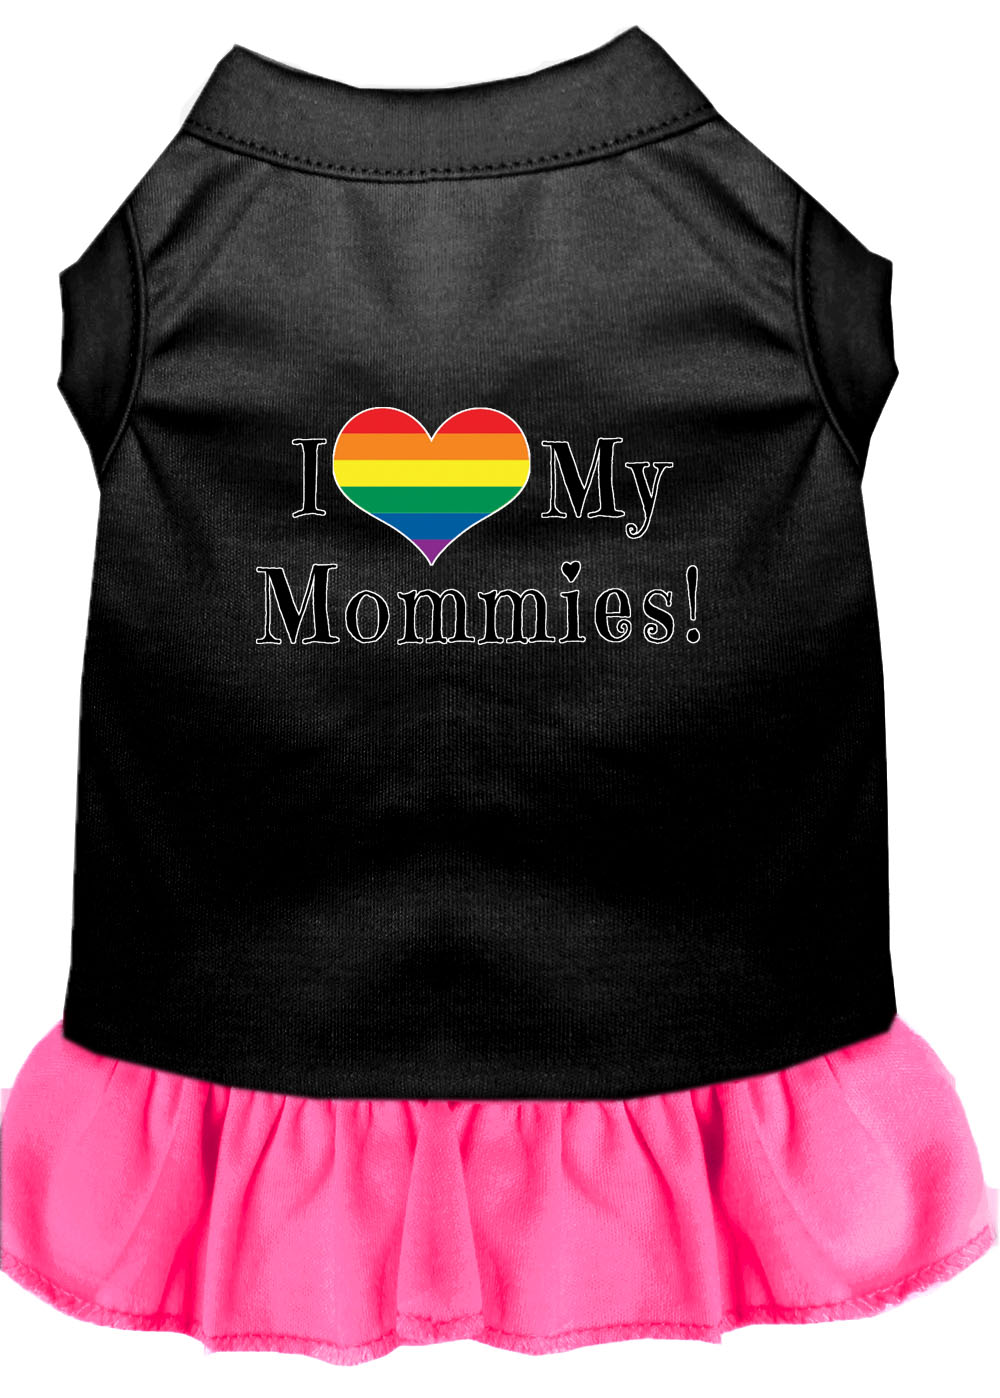 I Heart my Mommies Screen Print Dog Dress Black with Bright Pink Lg